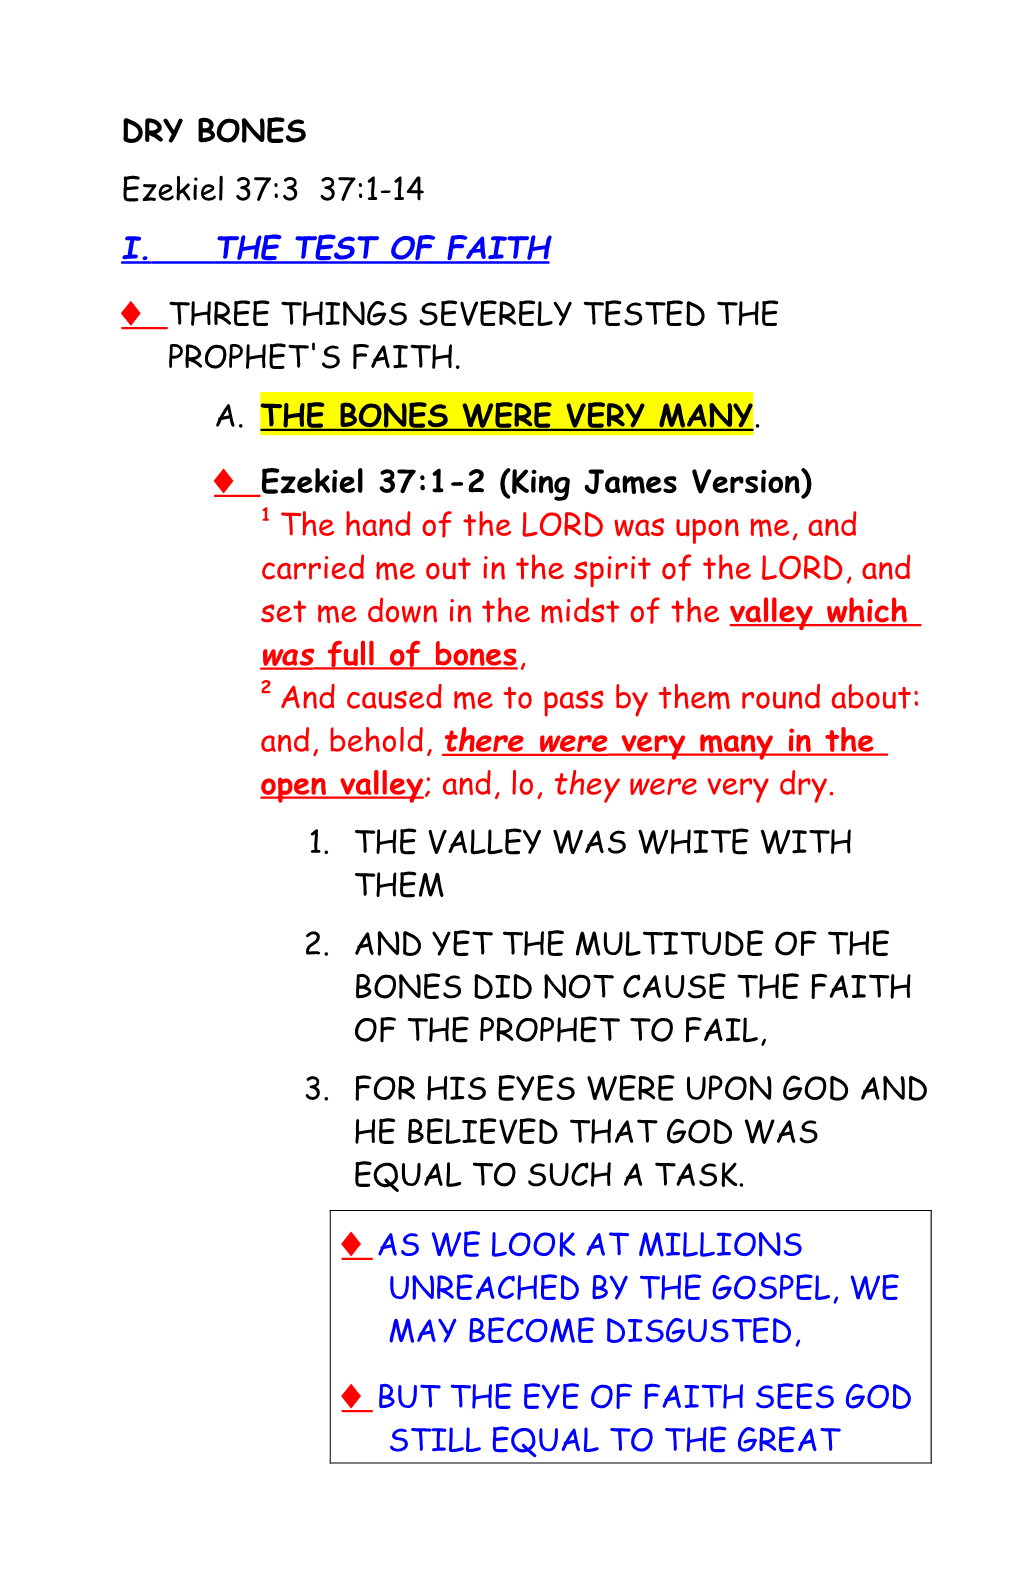 Three Things Severely Tested the Prophet's Faith